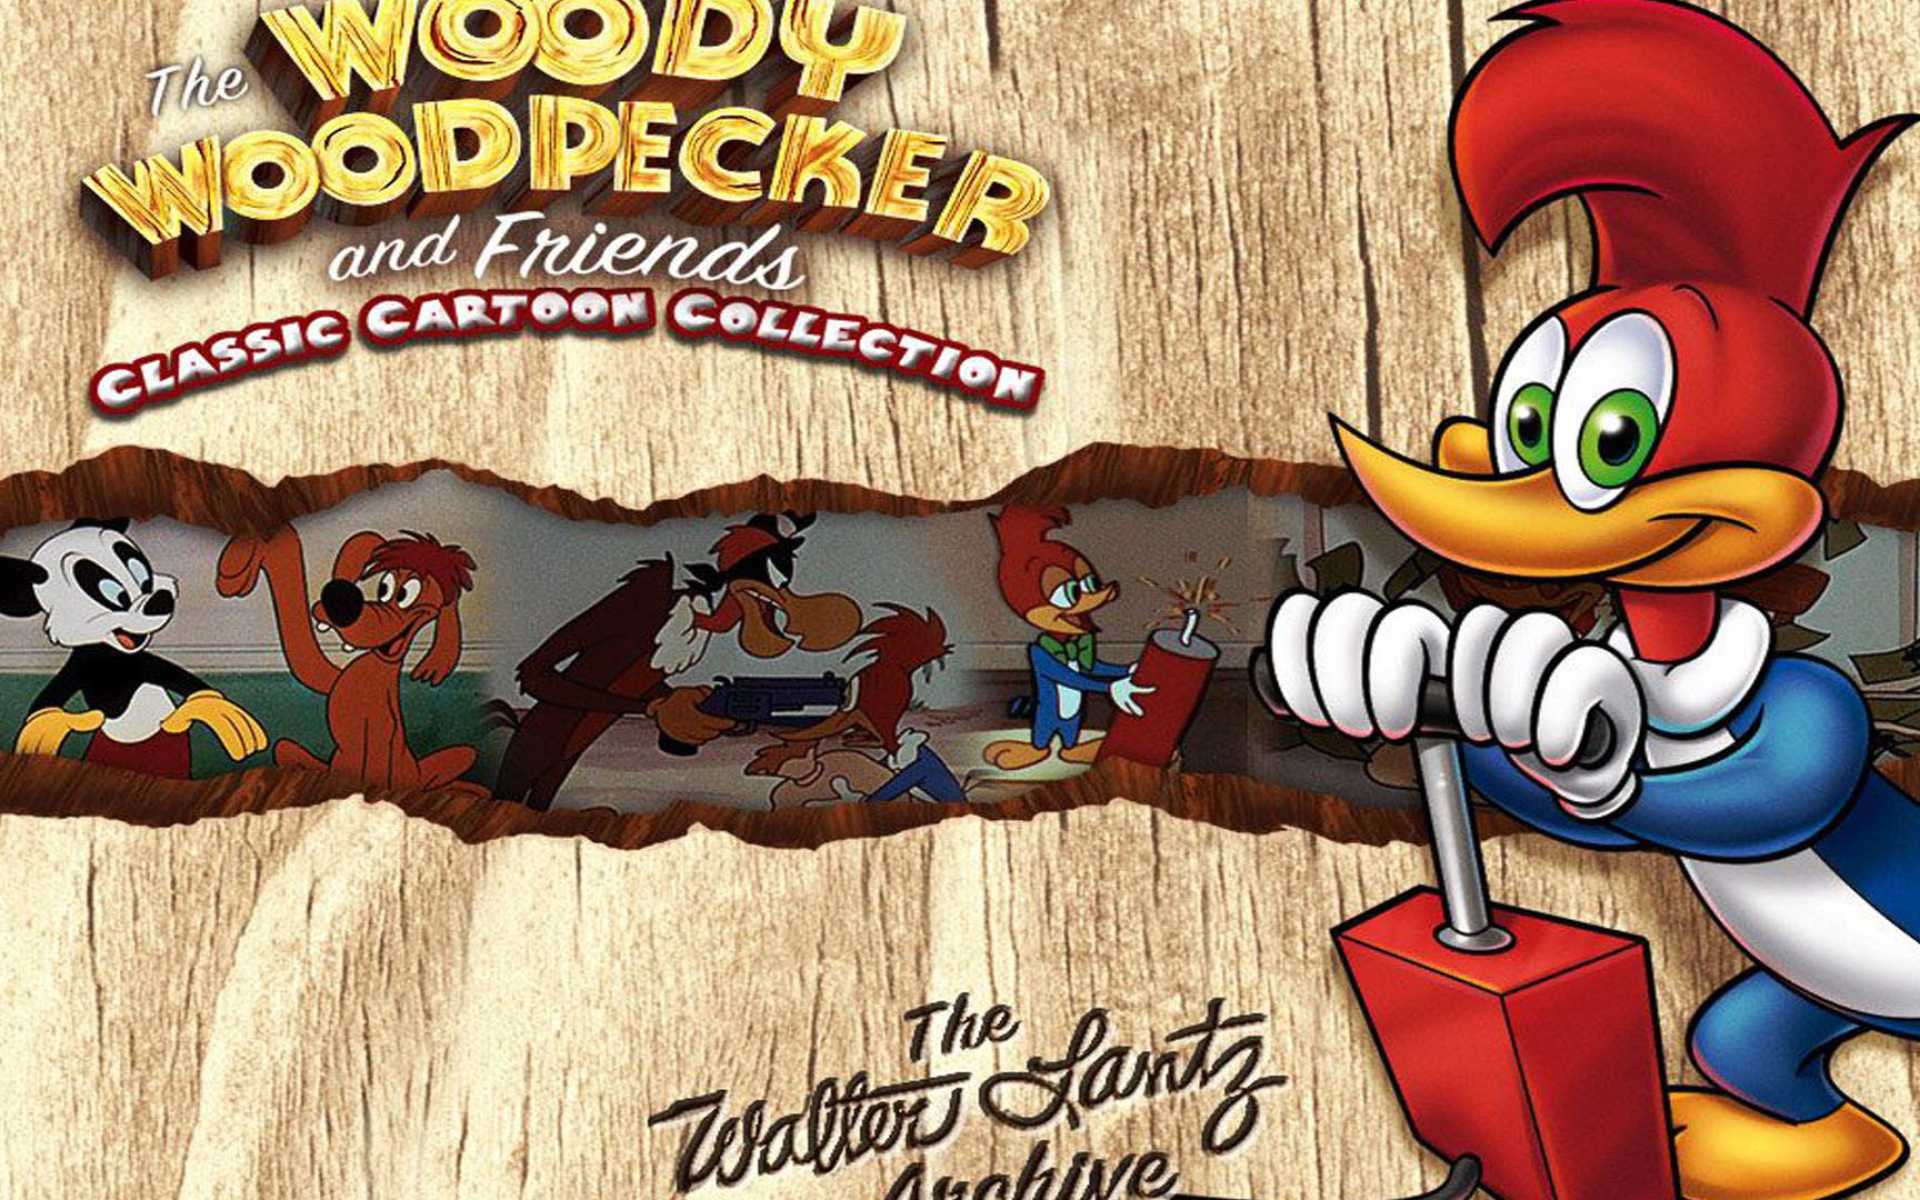 Woody Woodpecker, High definition wallpapers, Desktop and mobile, Animated entertainment, 1920x1200 HD Desktop